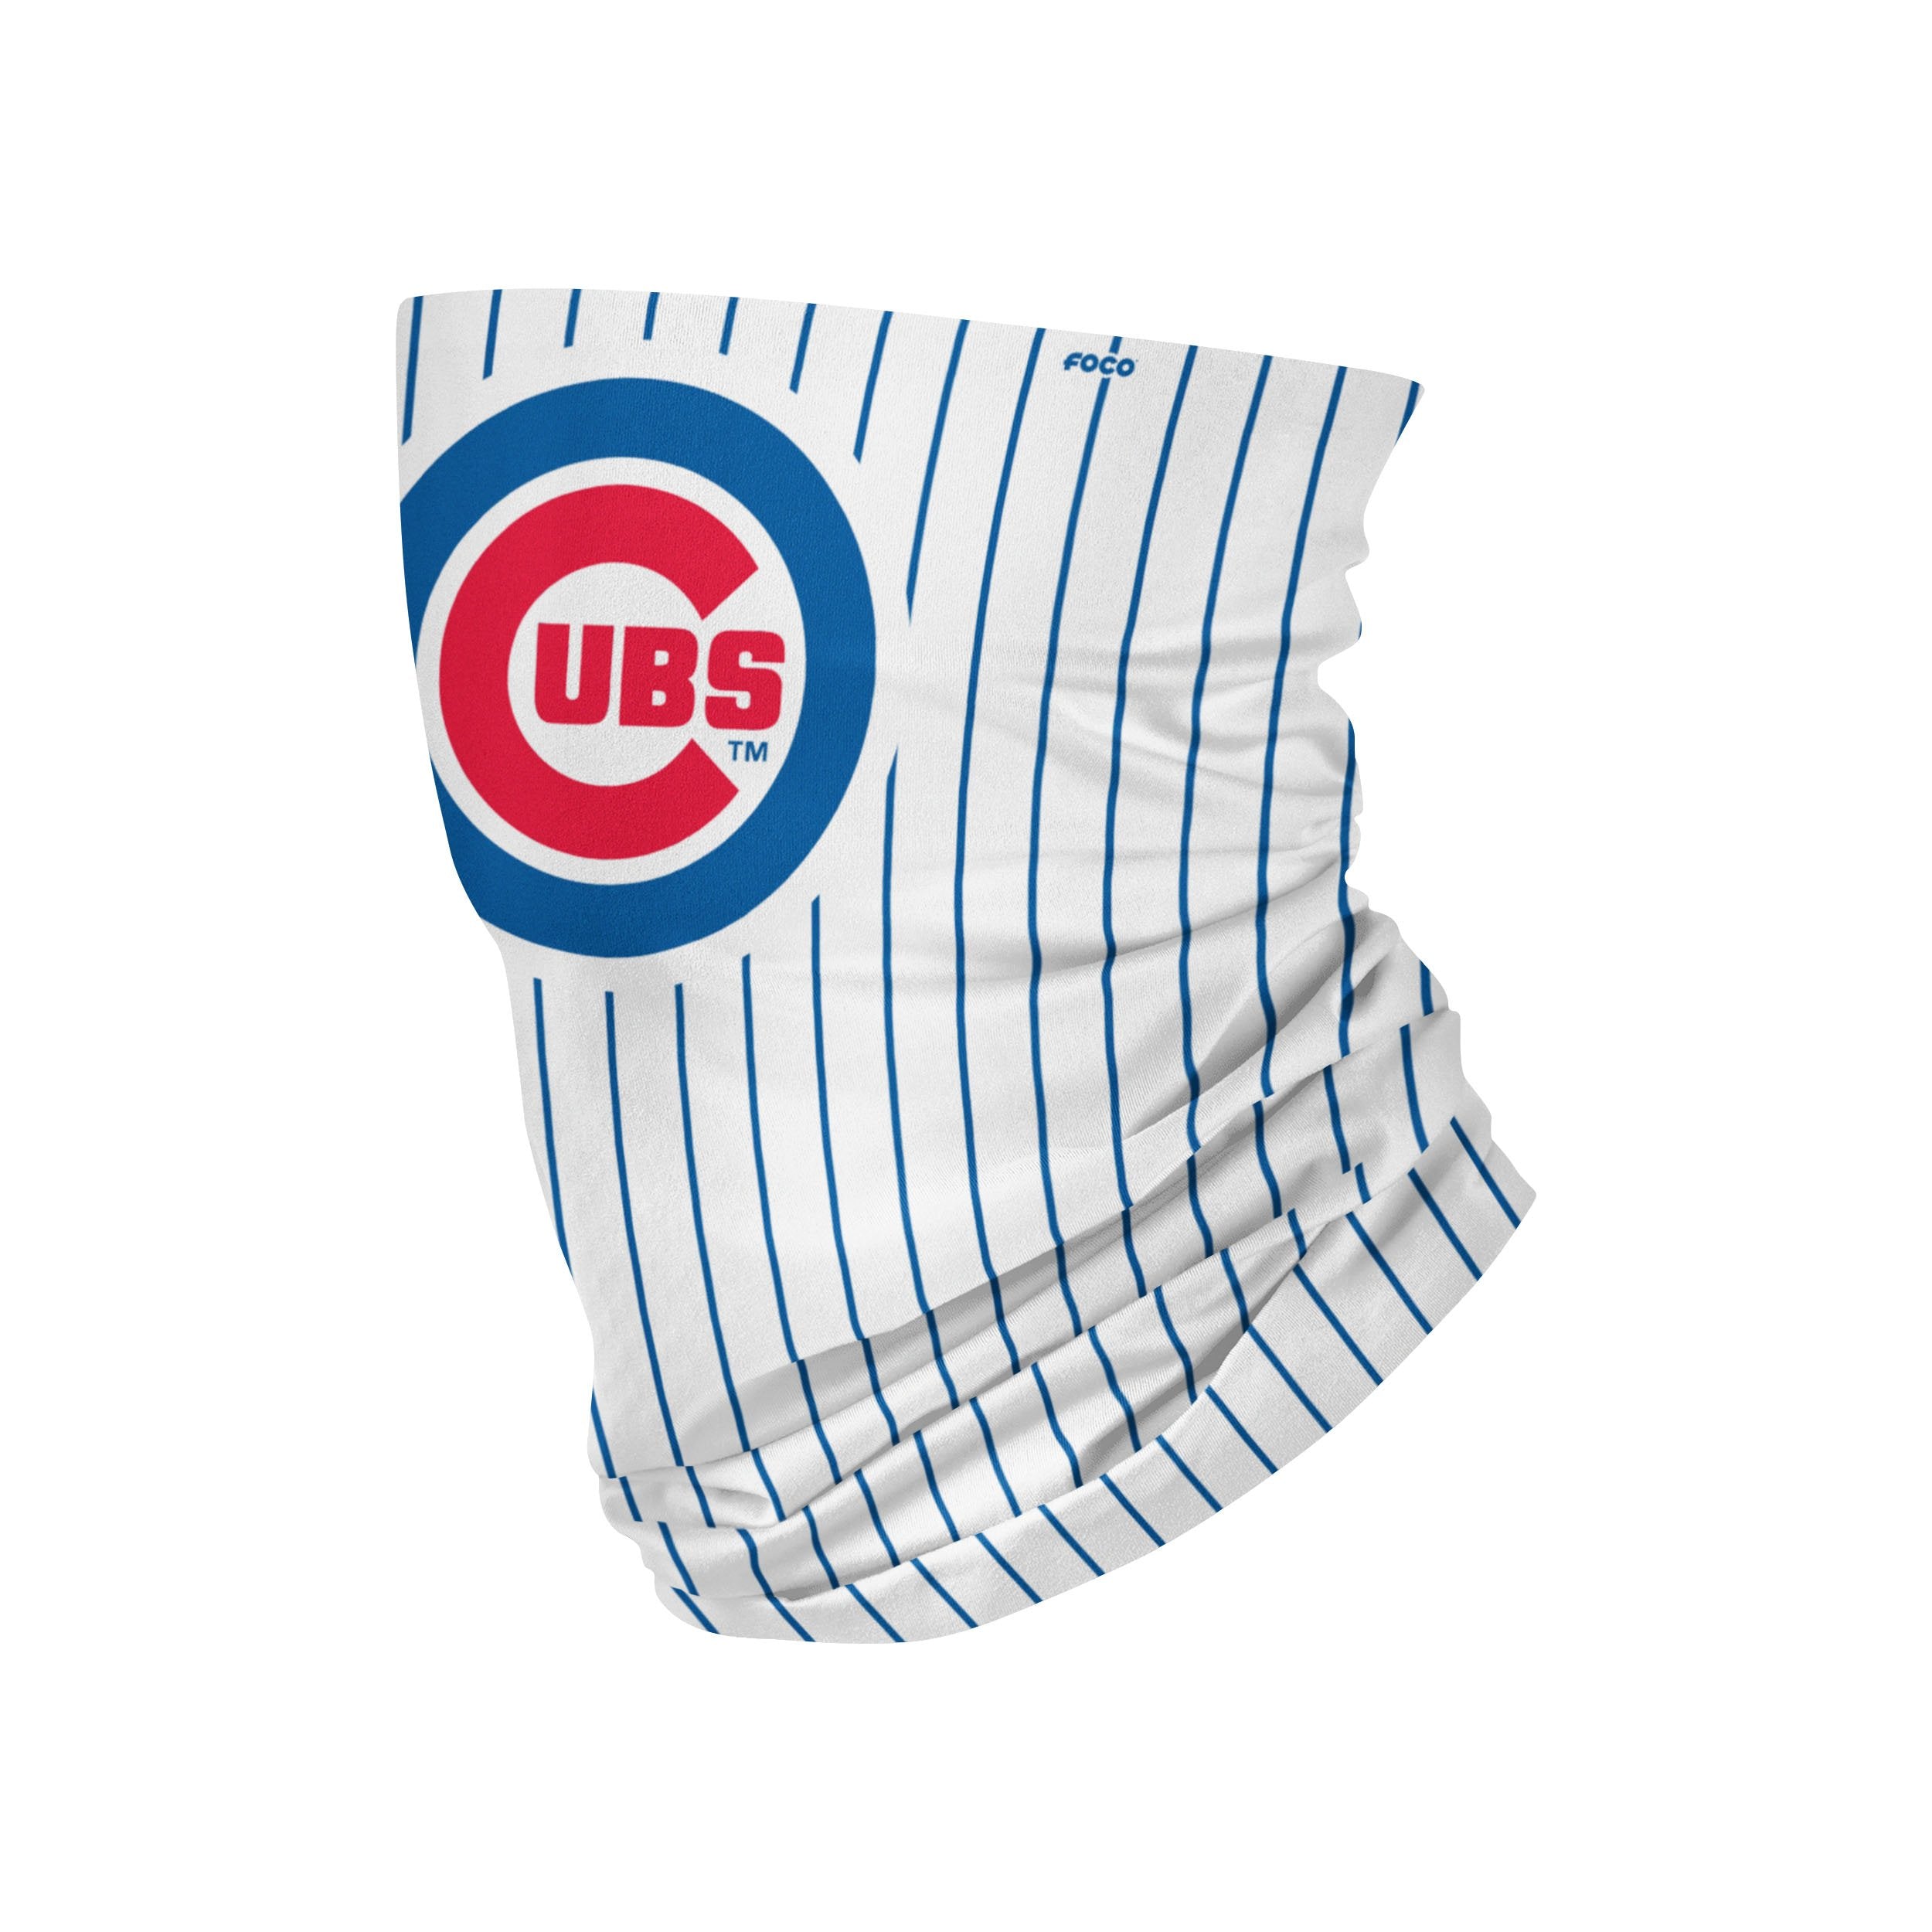 Chicago Cubs Volunteer Outfielder Tank Top with Bandana